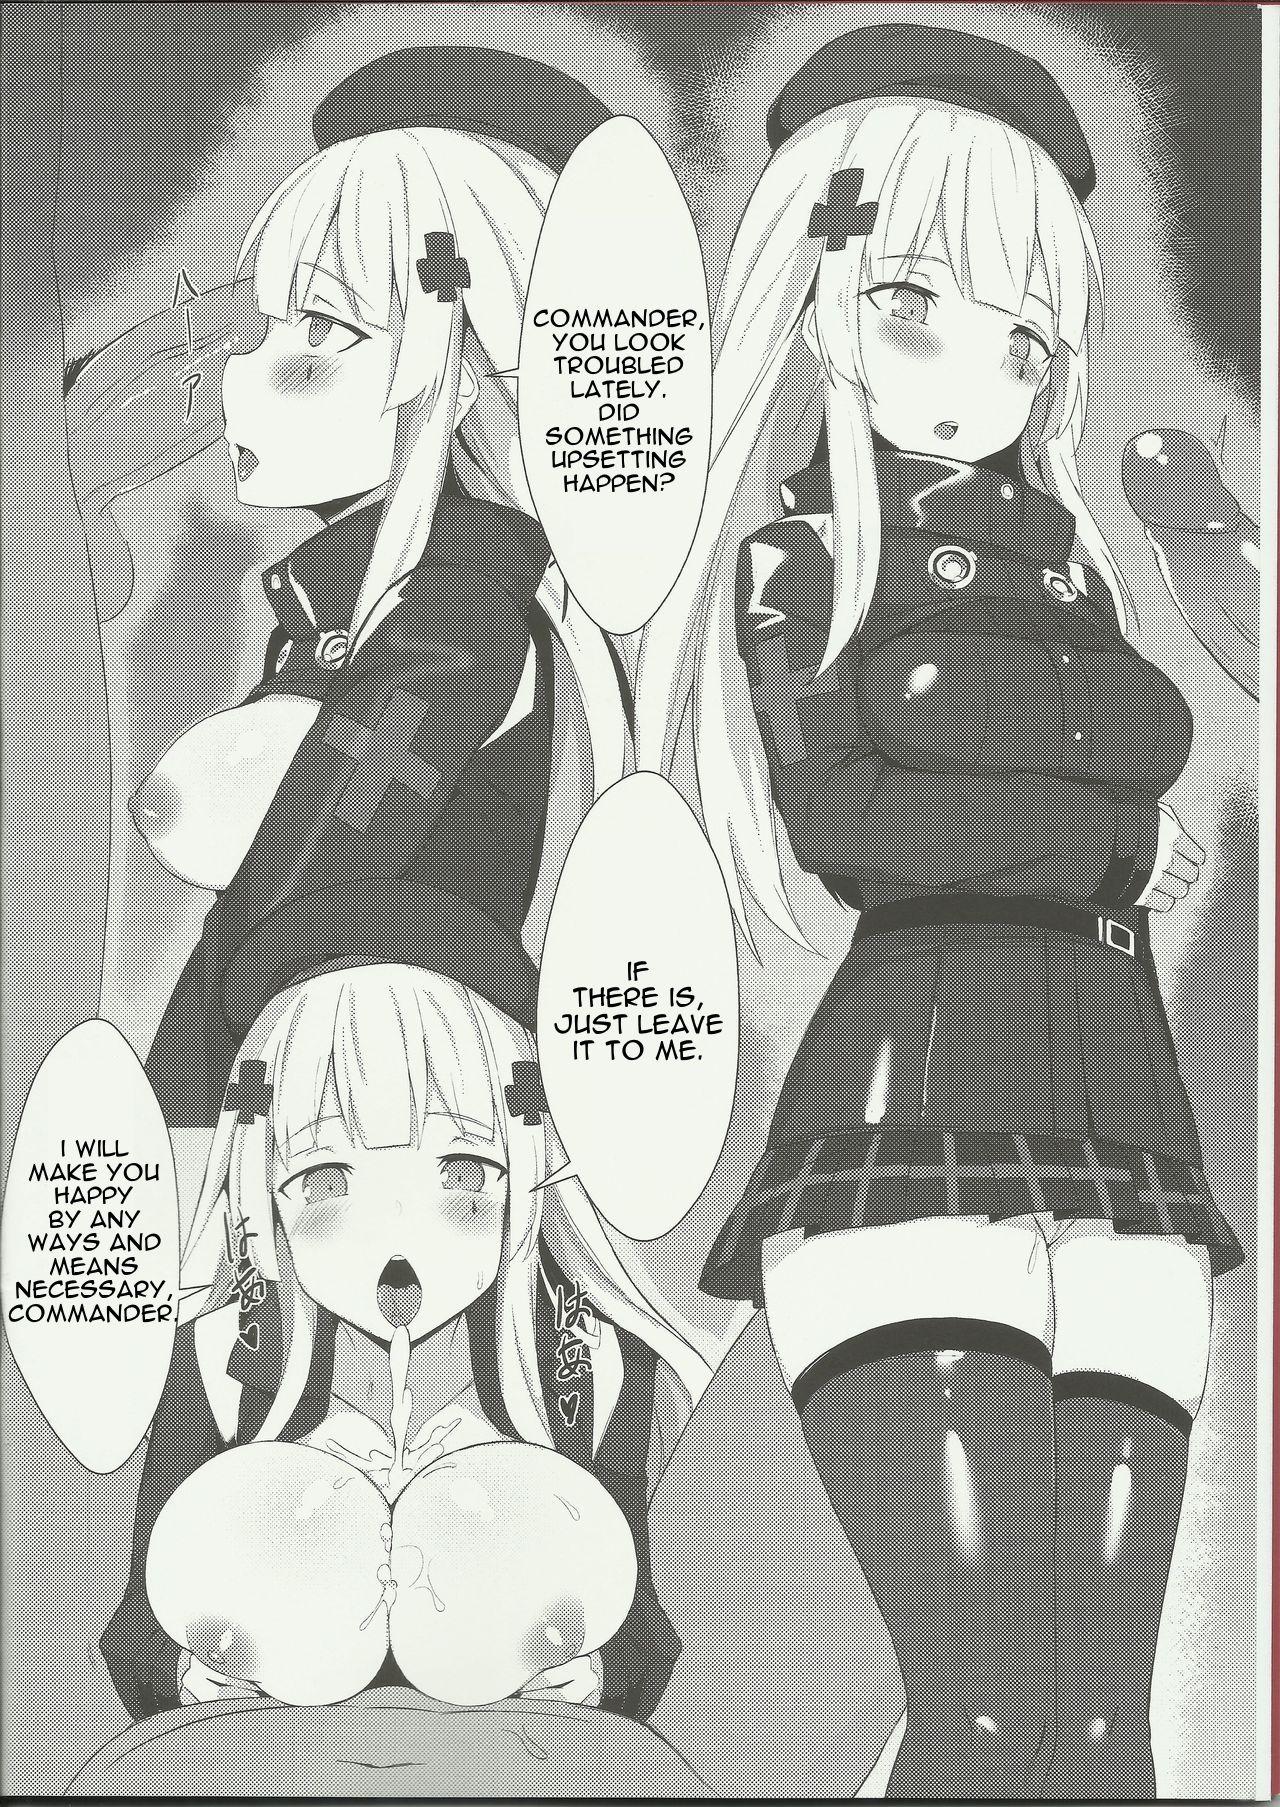 Missionary 404 - Girls frontline Trio - Page 3